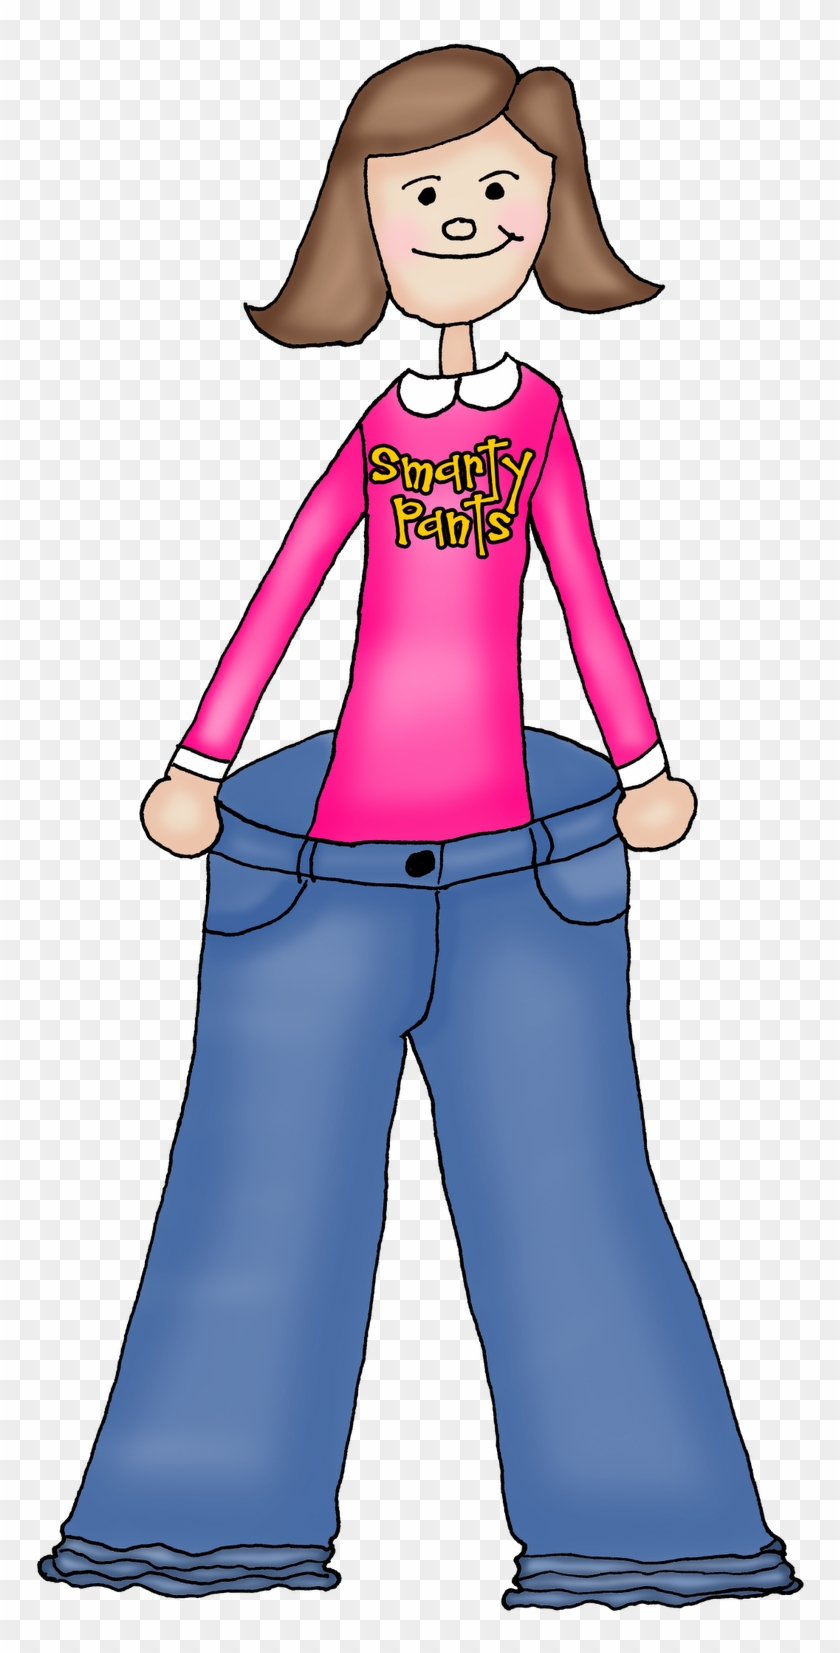 Tight - Clothes That Don T Fit Clipart #52253